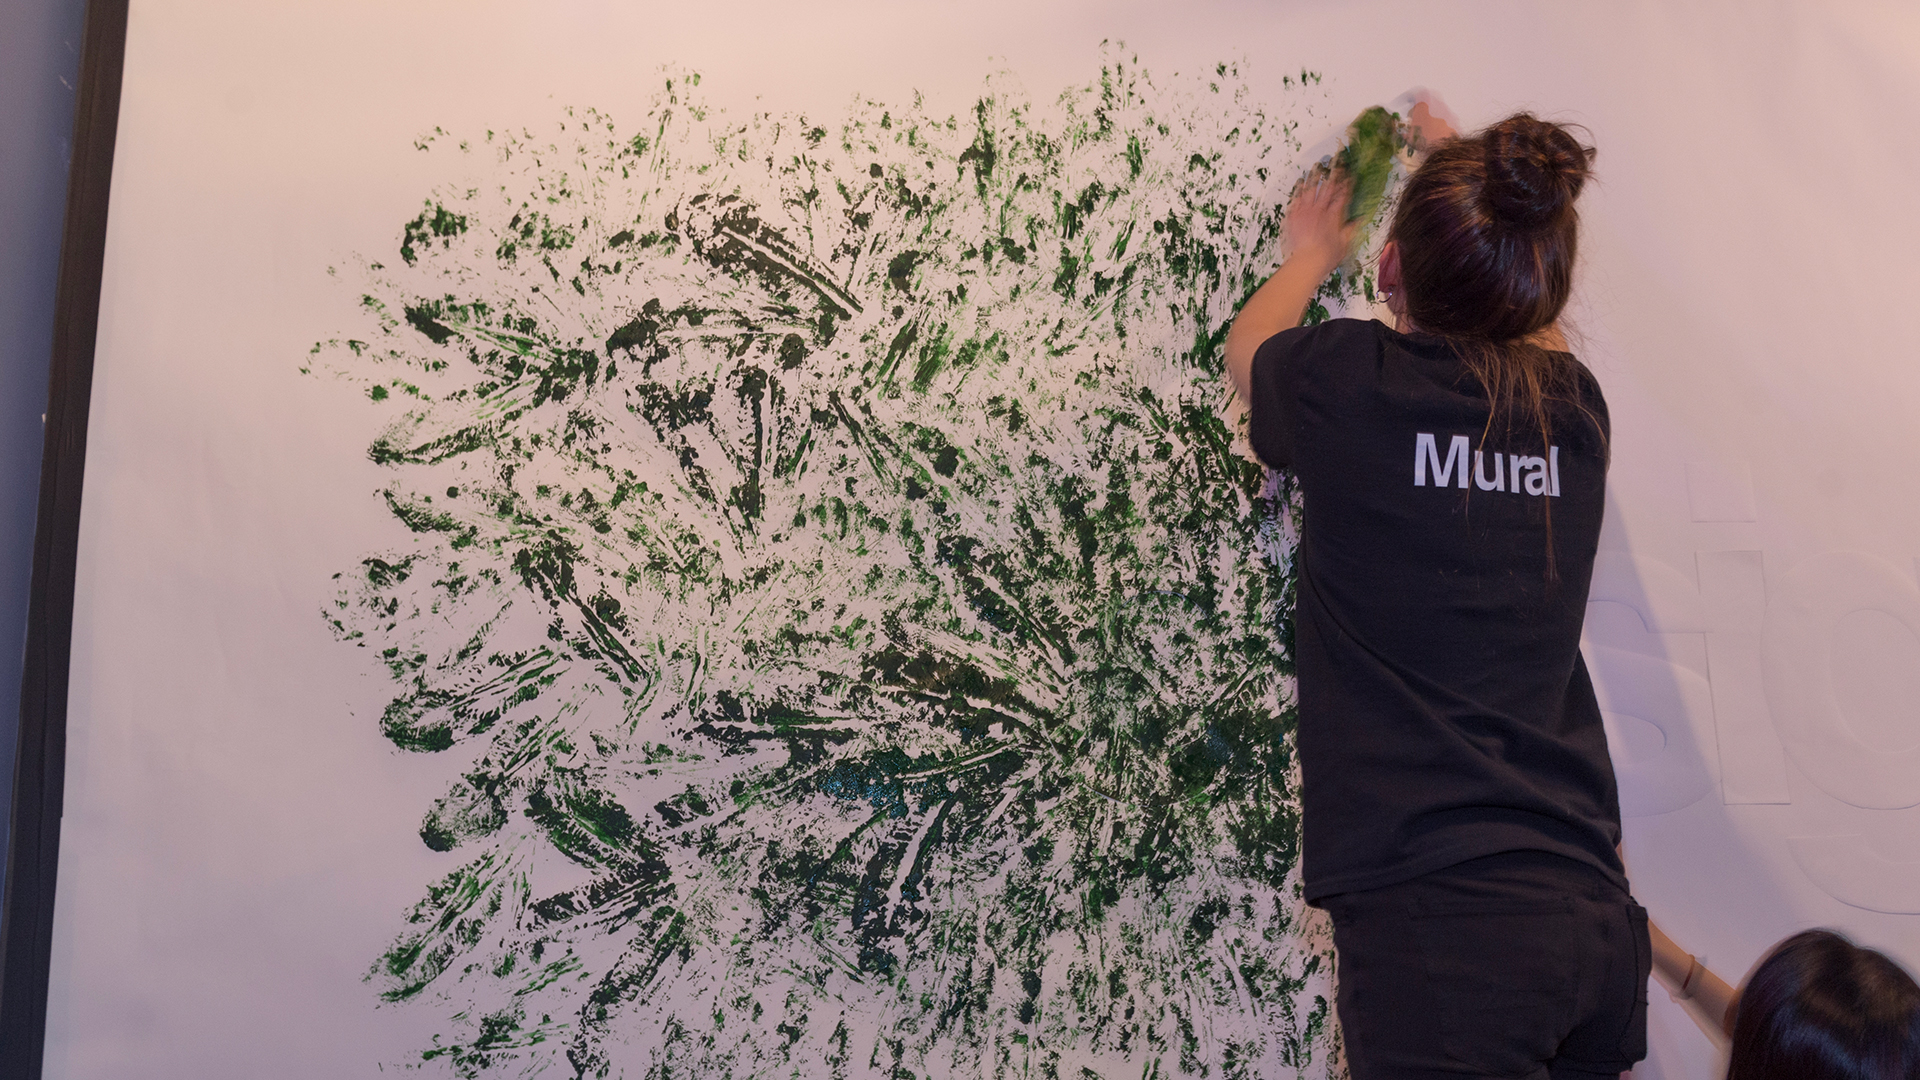 Student using lettuce leaf to stamp green paint on mural wall